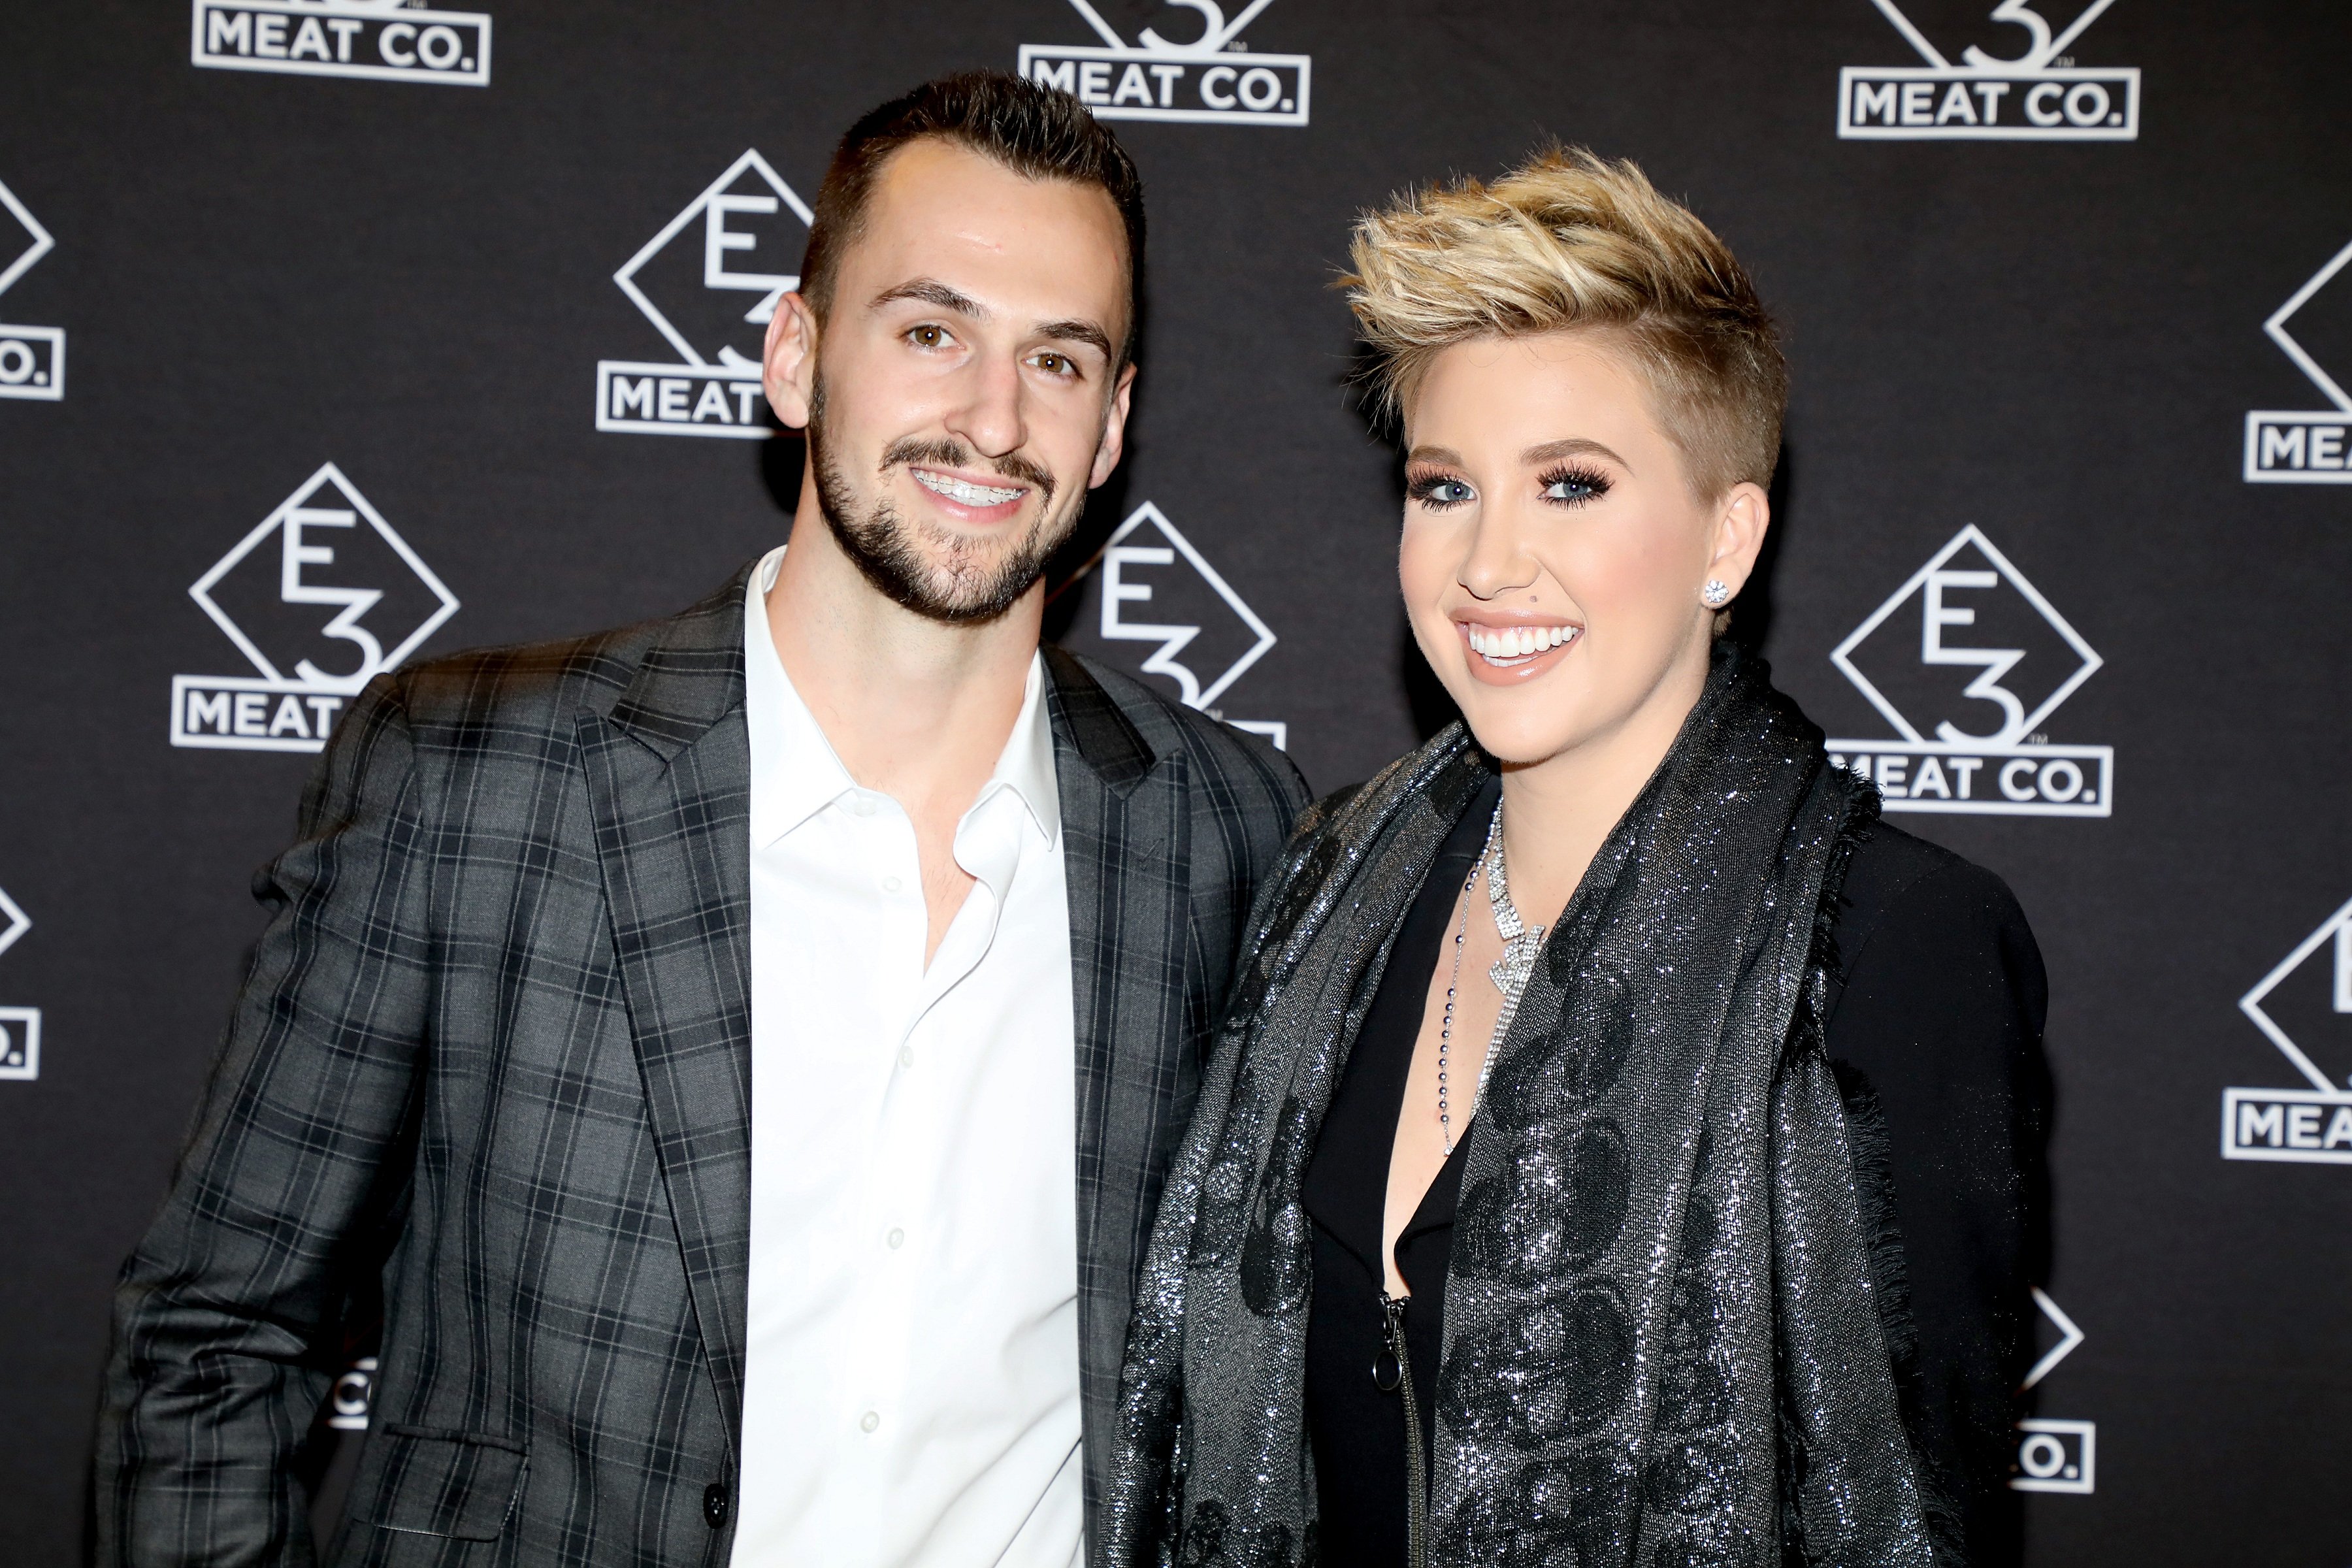 Nic Kerdiles and Savannah Chrisley attend the grand opening of E3 Chophouse Nashville on November 20, 2019, in Nashville, Tennessee. | Source: Getty Images.